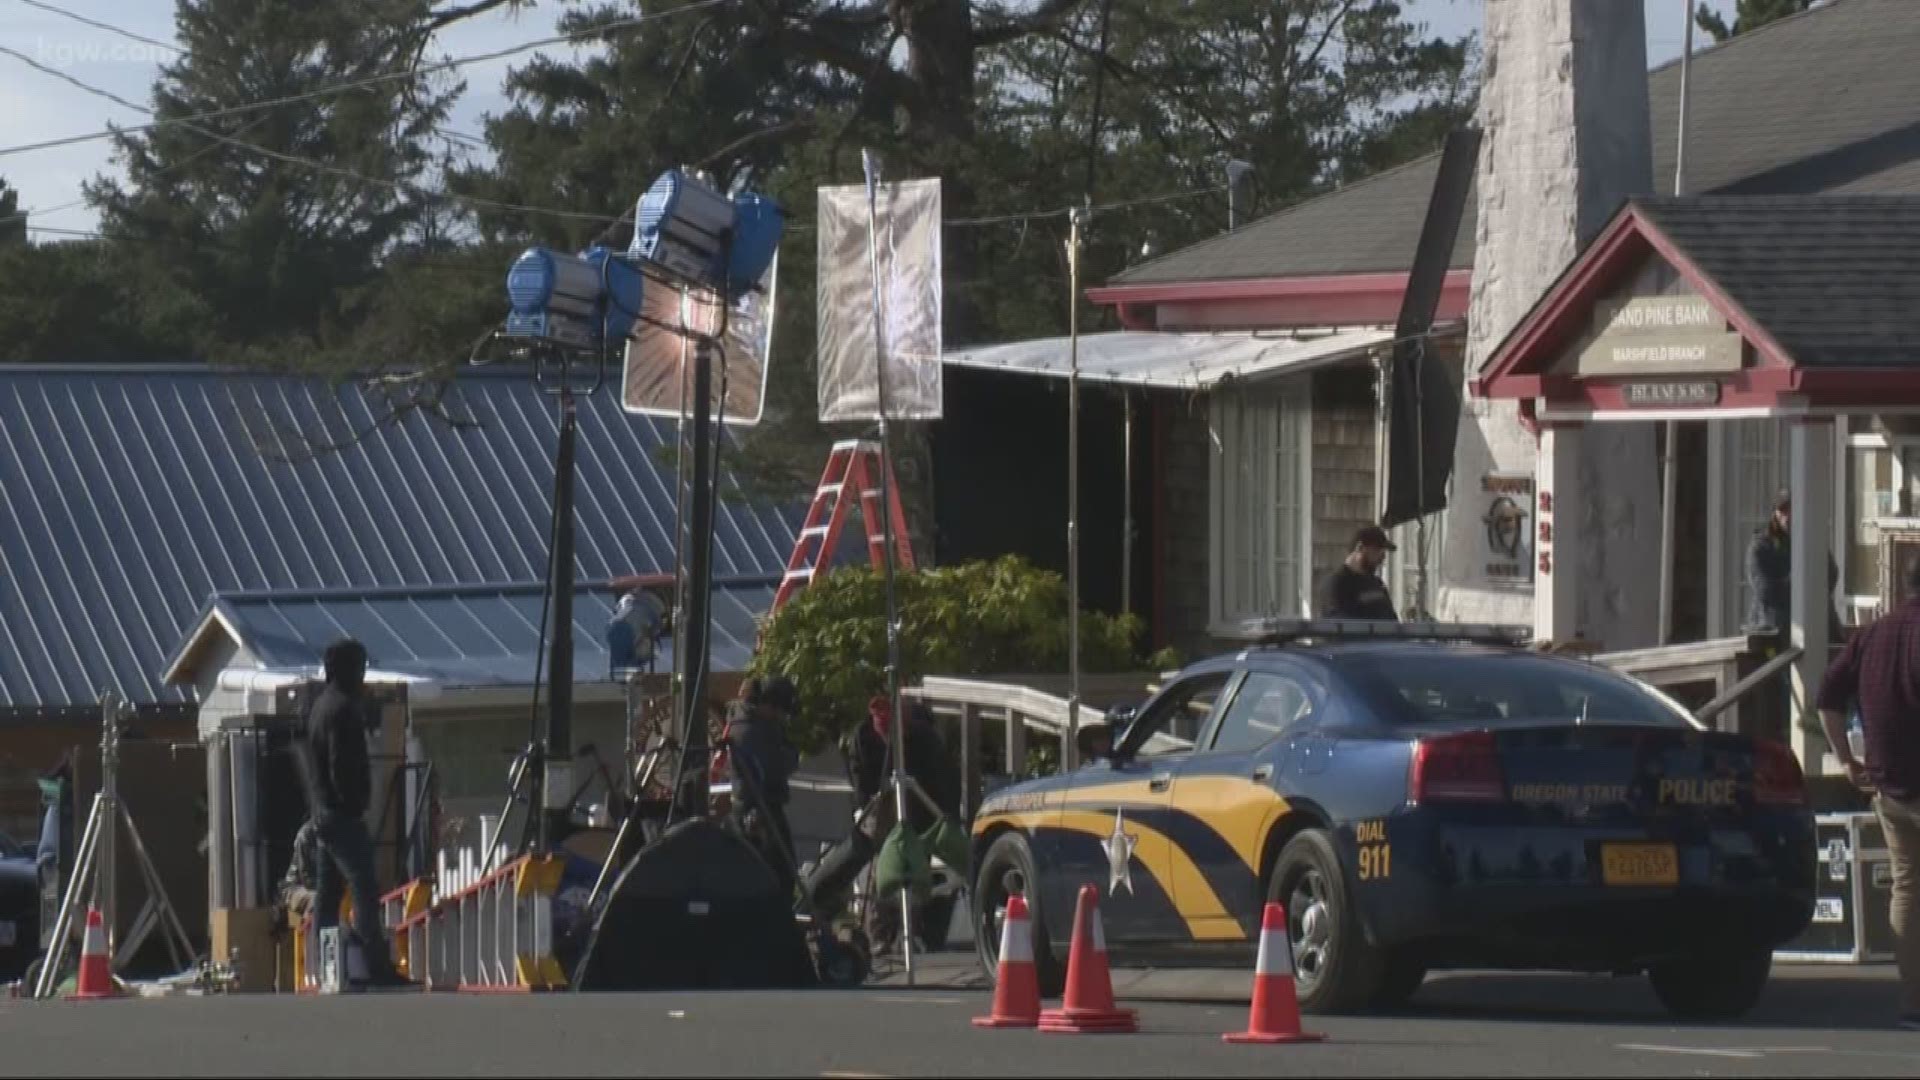 A TV show is being filmed on the Oregon Coast.